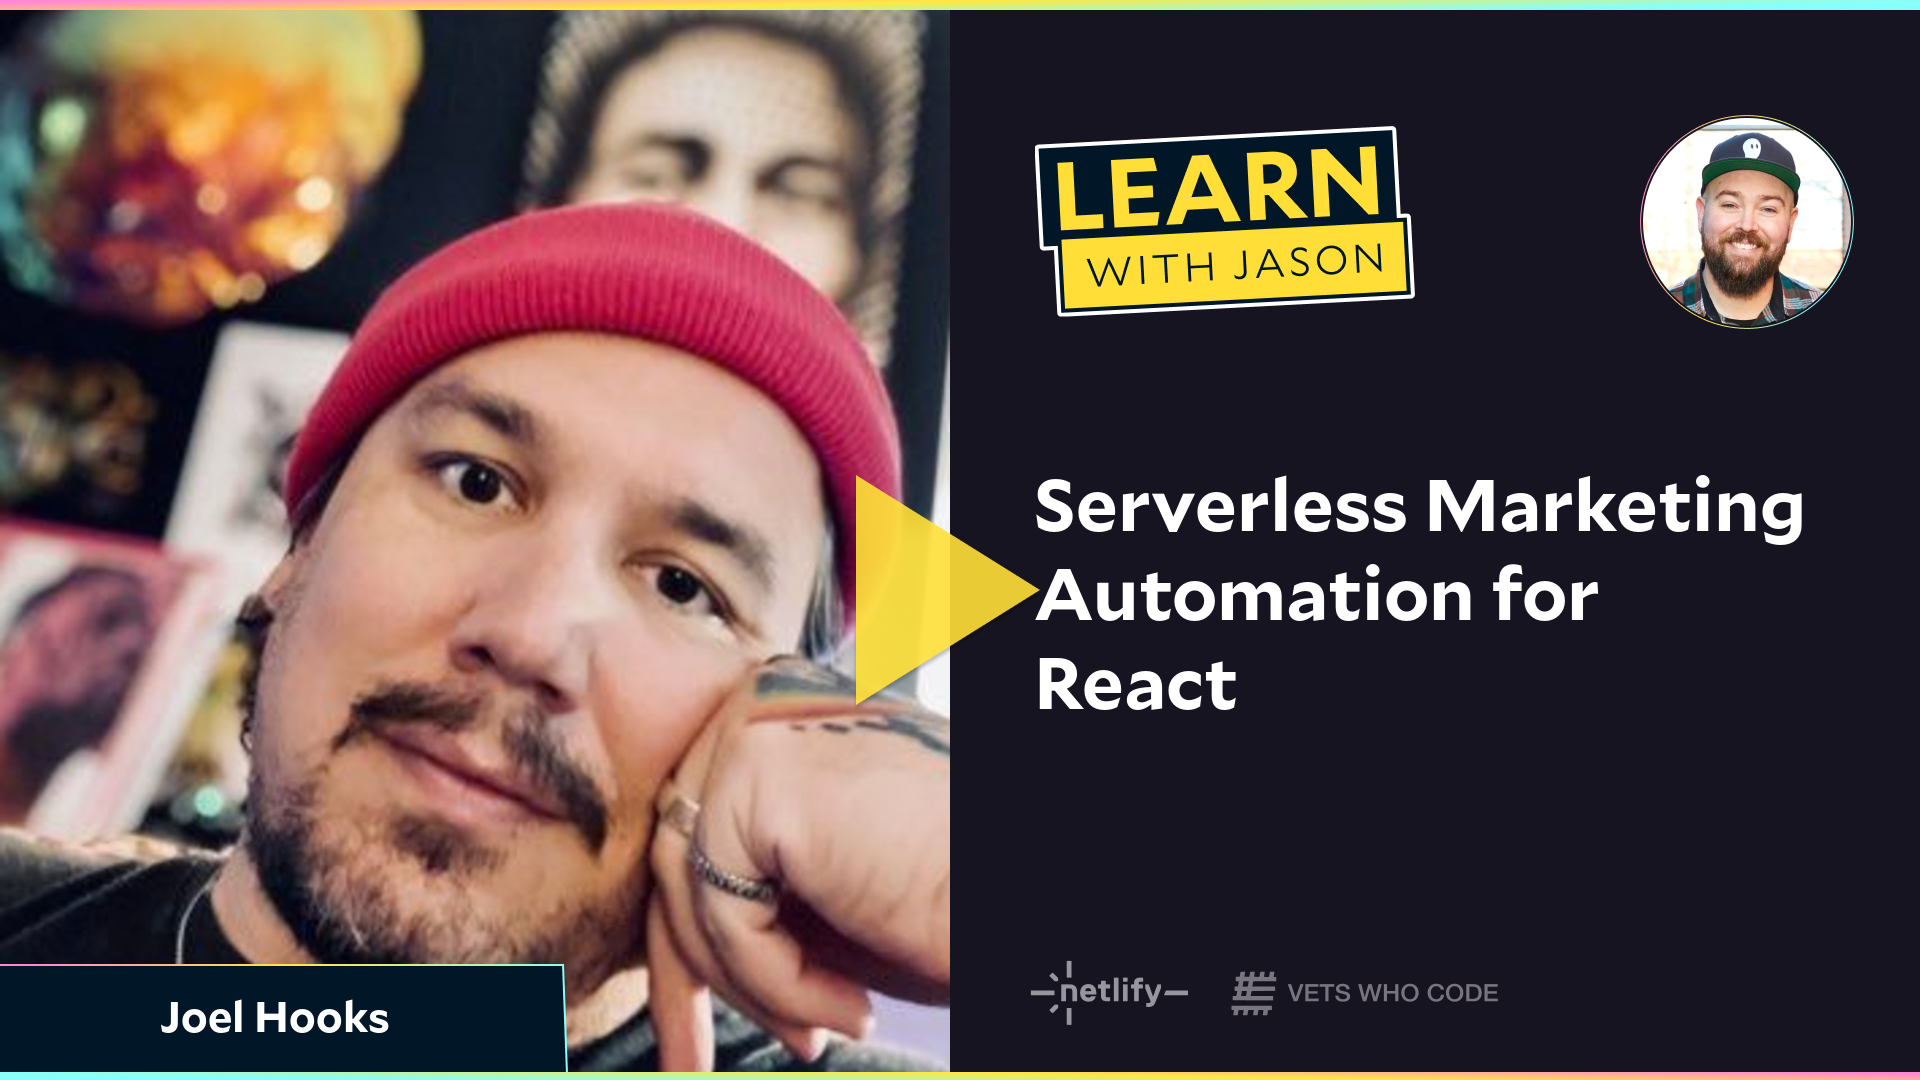 Serverless Marketing Automation for React  (with Joel Hooks)